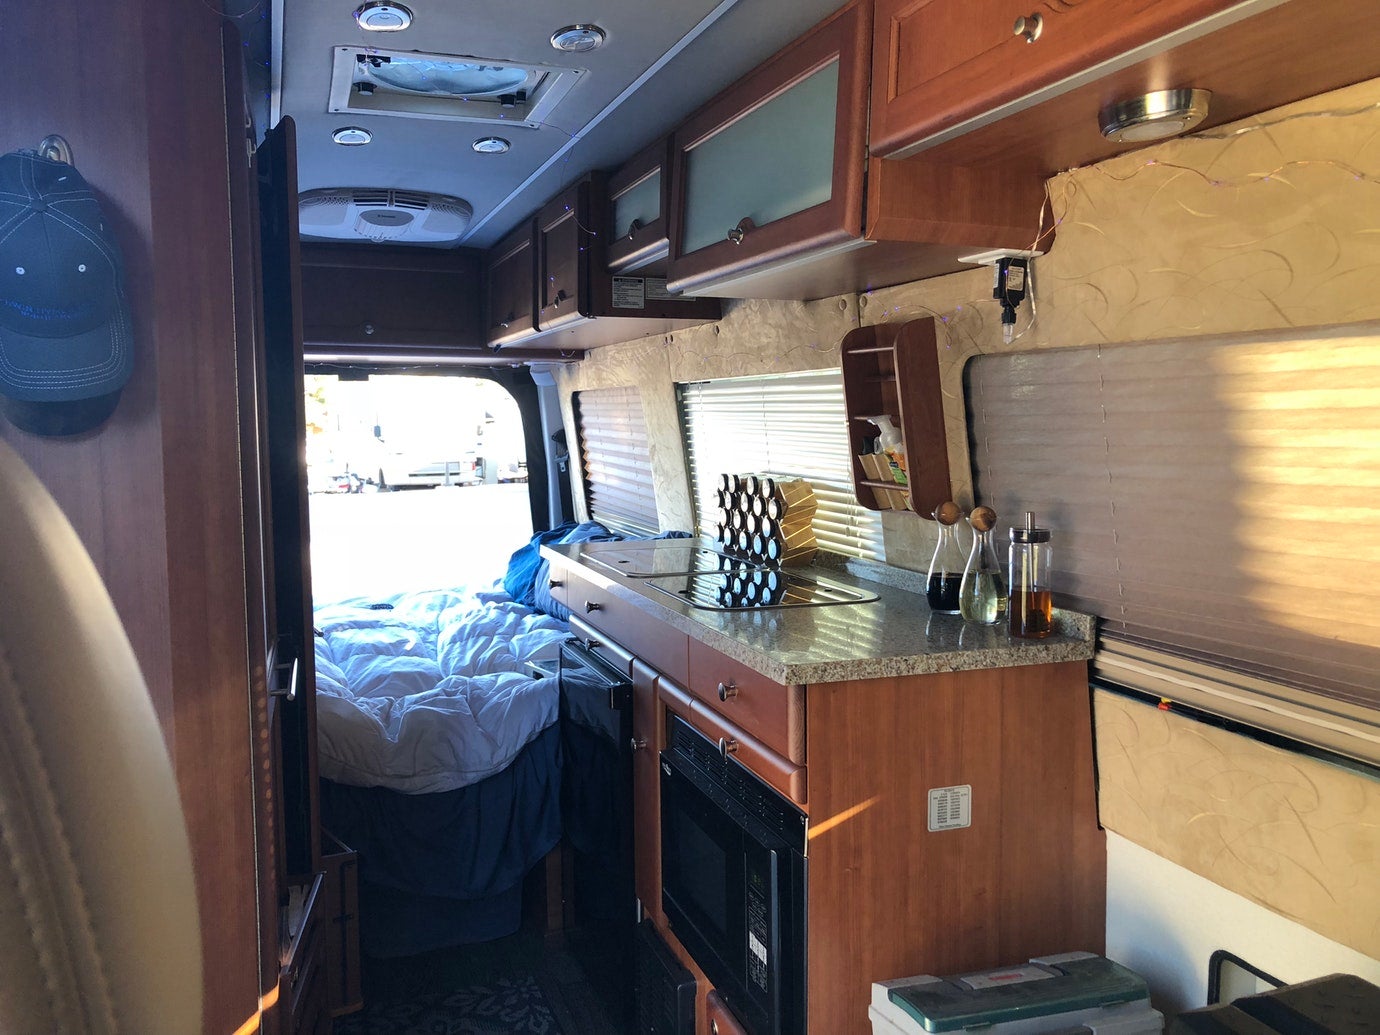 interior of an rv kitchen after being repaired for the winter